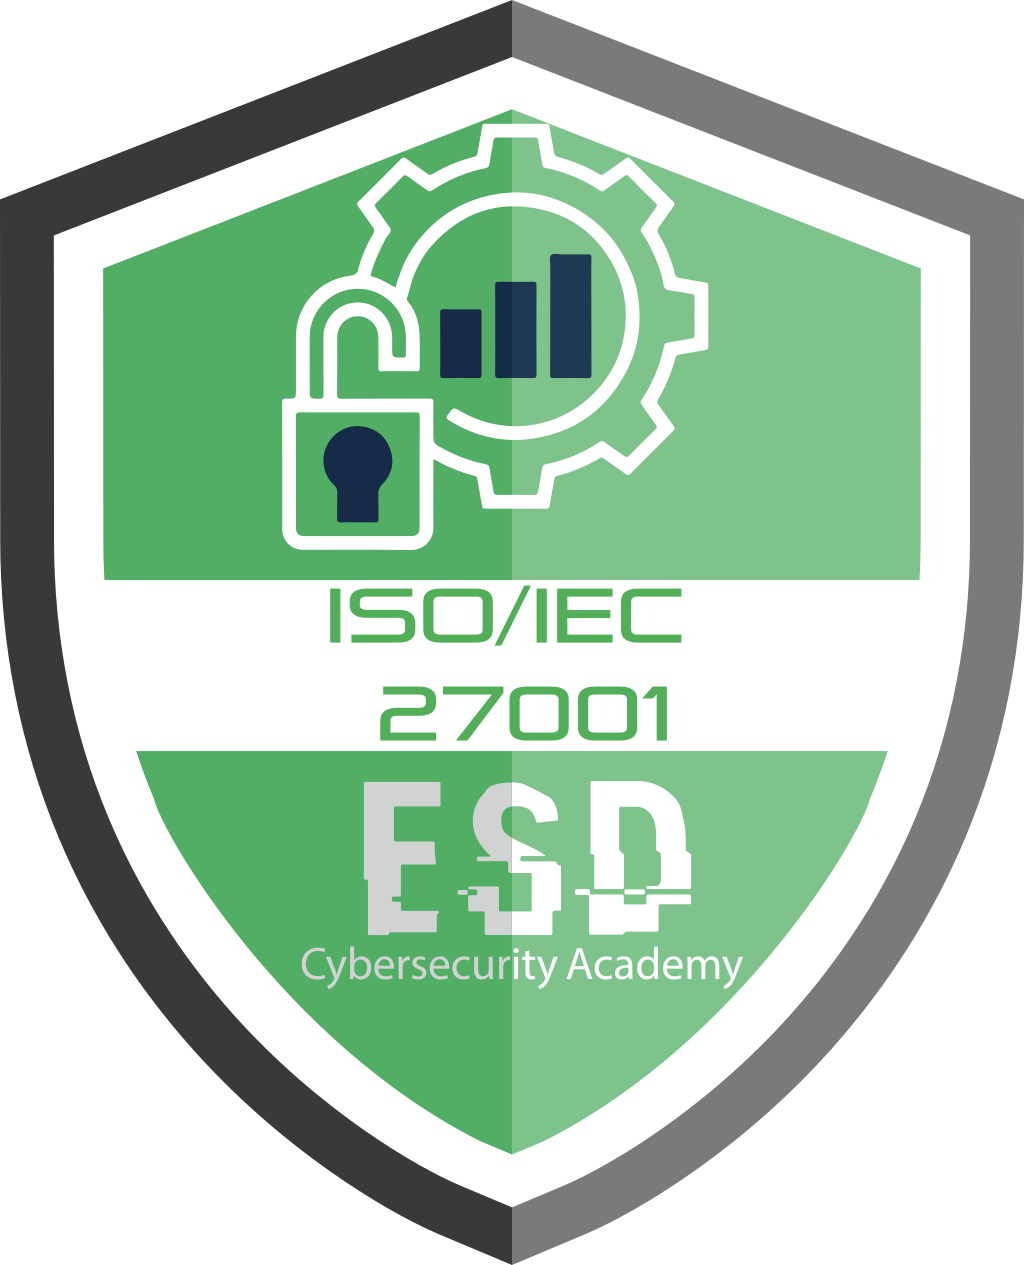 Certification ISO 27001